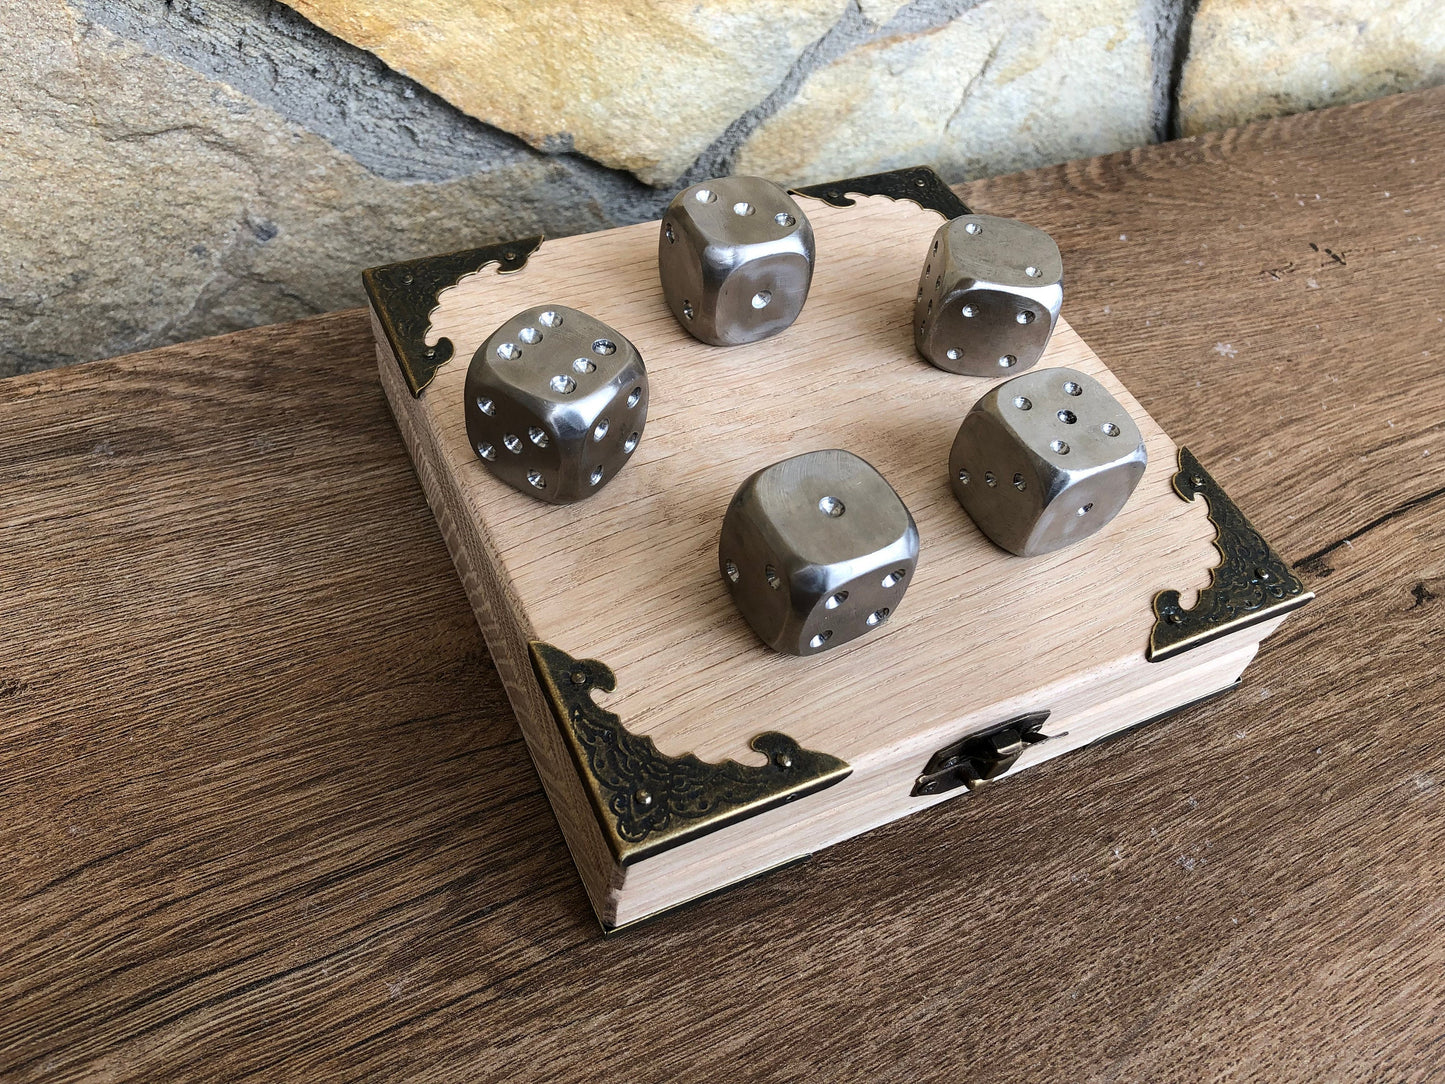 Dices, set of dices, iron dice, steel dice, custom dice, pair of dices,gambling dice,gaming dice,role playing games,tabletop dices,iron gift